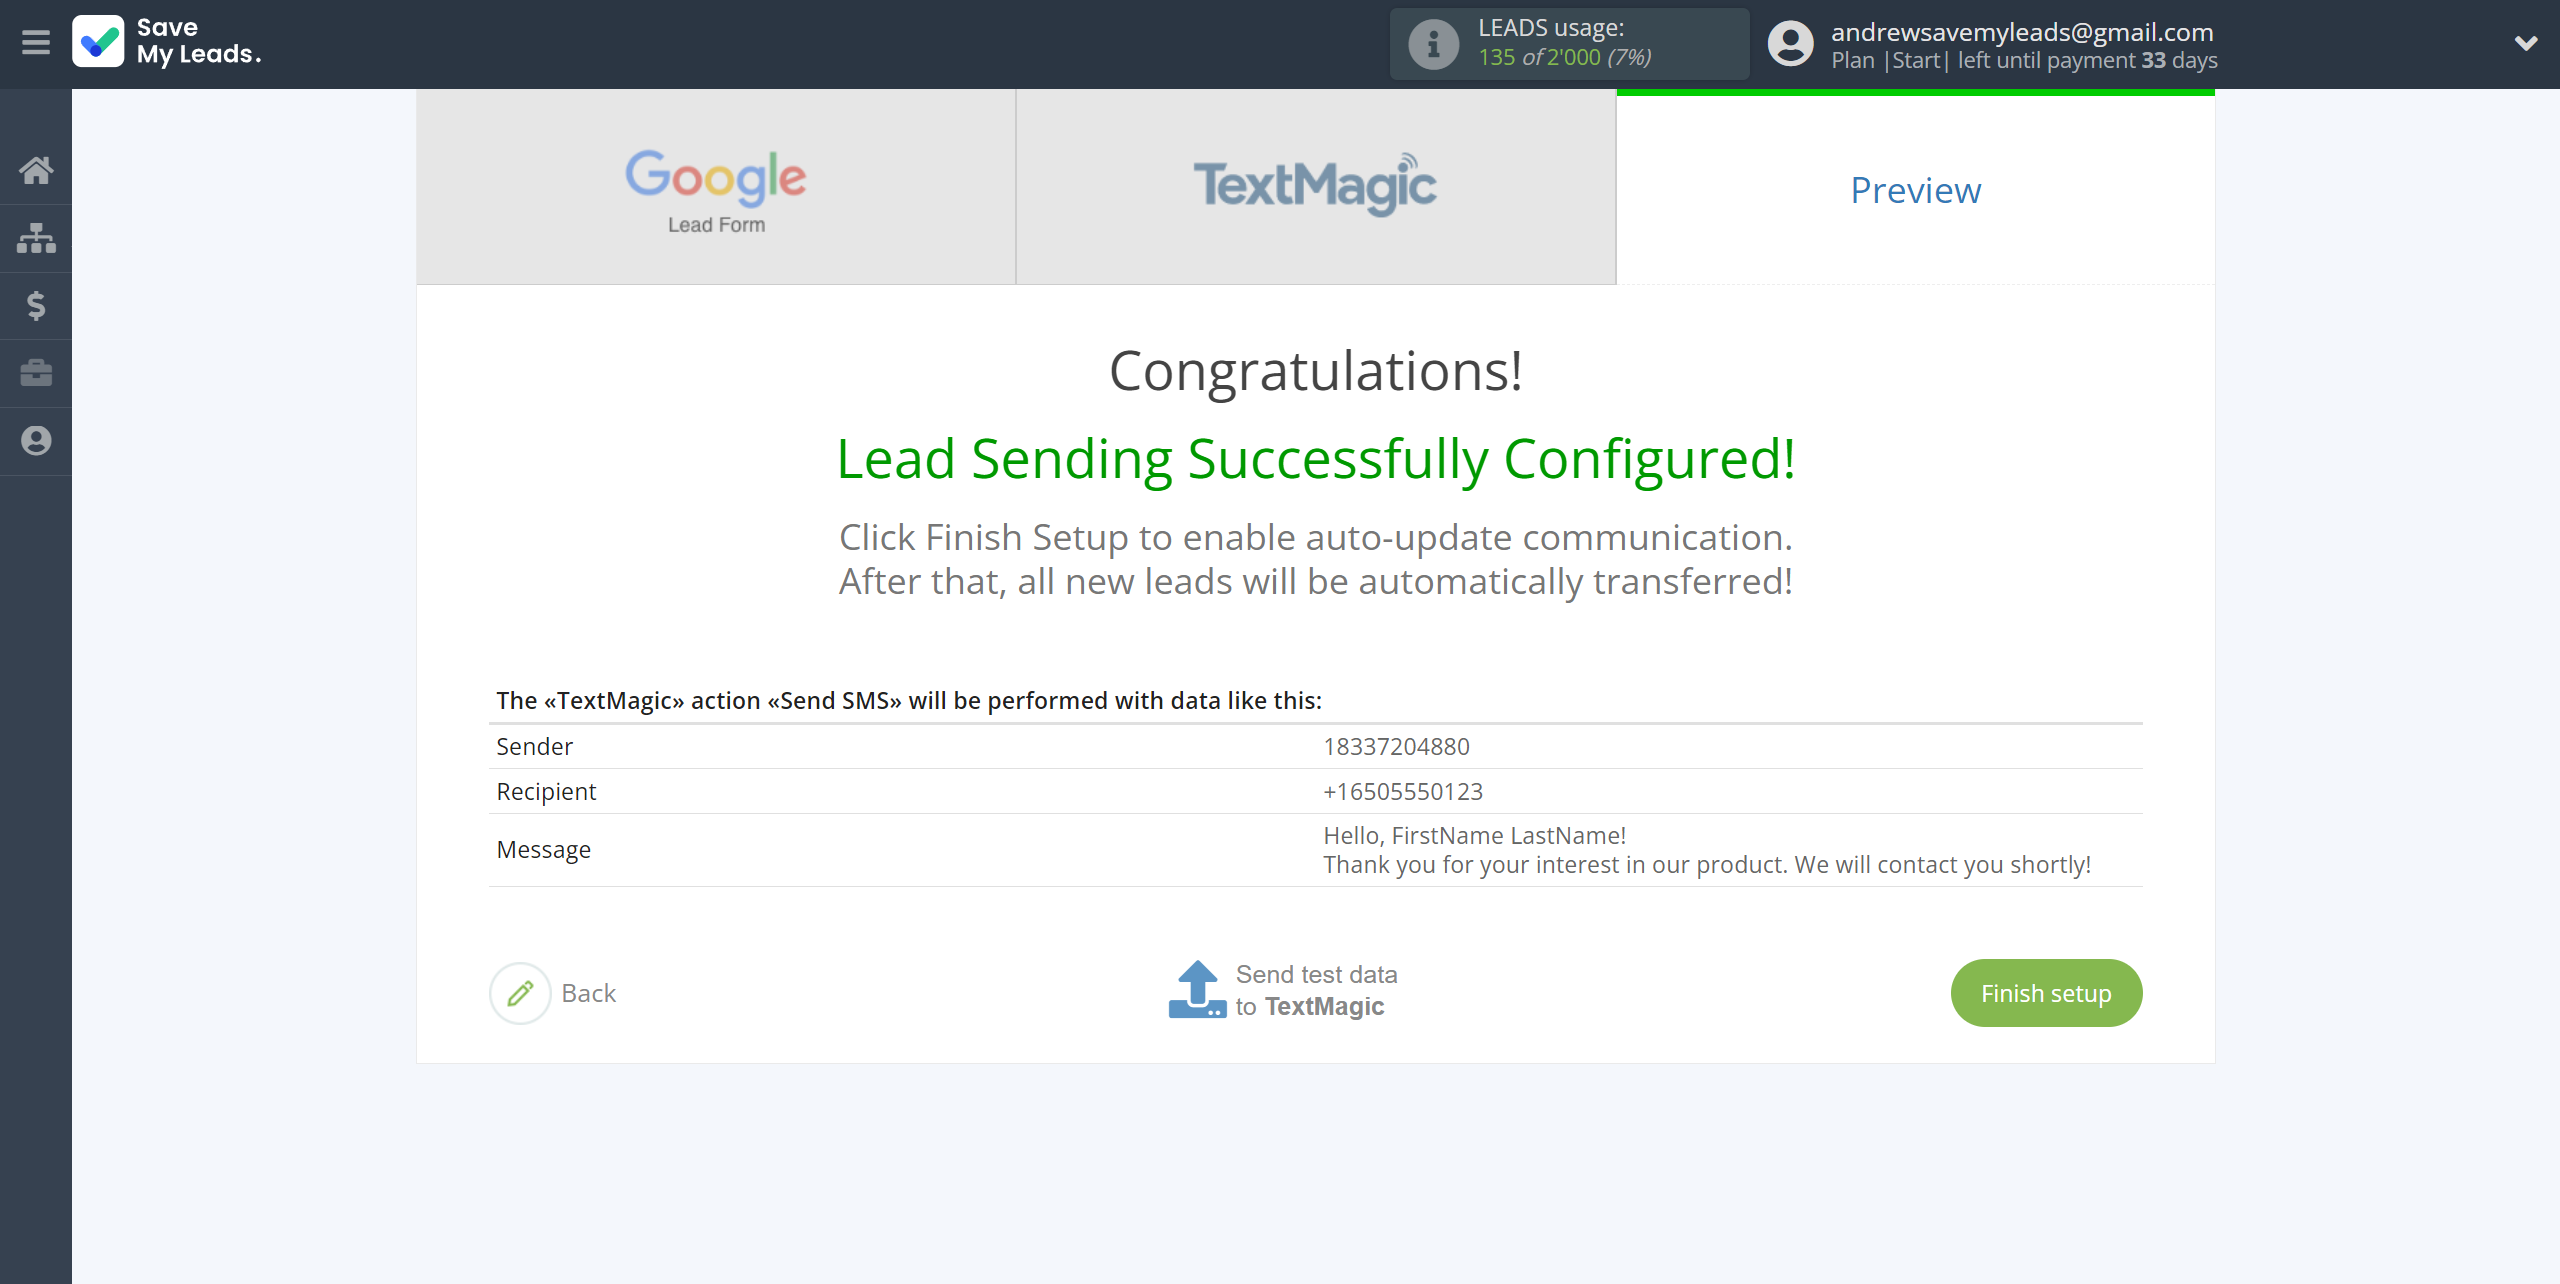 How to Connect Google Lead Form with TextMagic | Test data